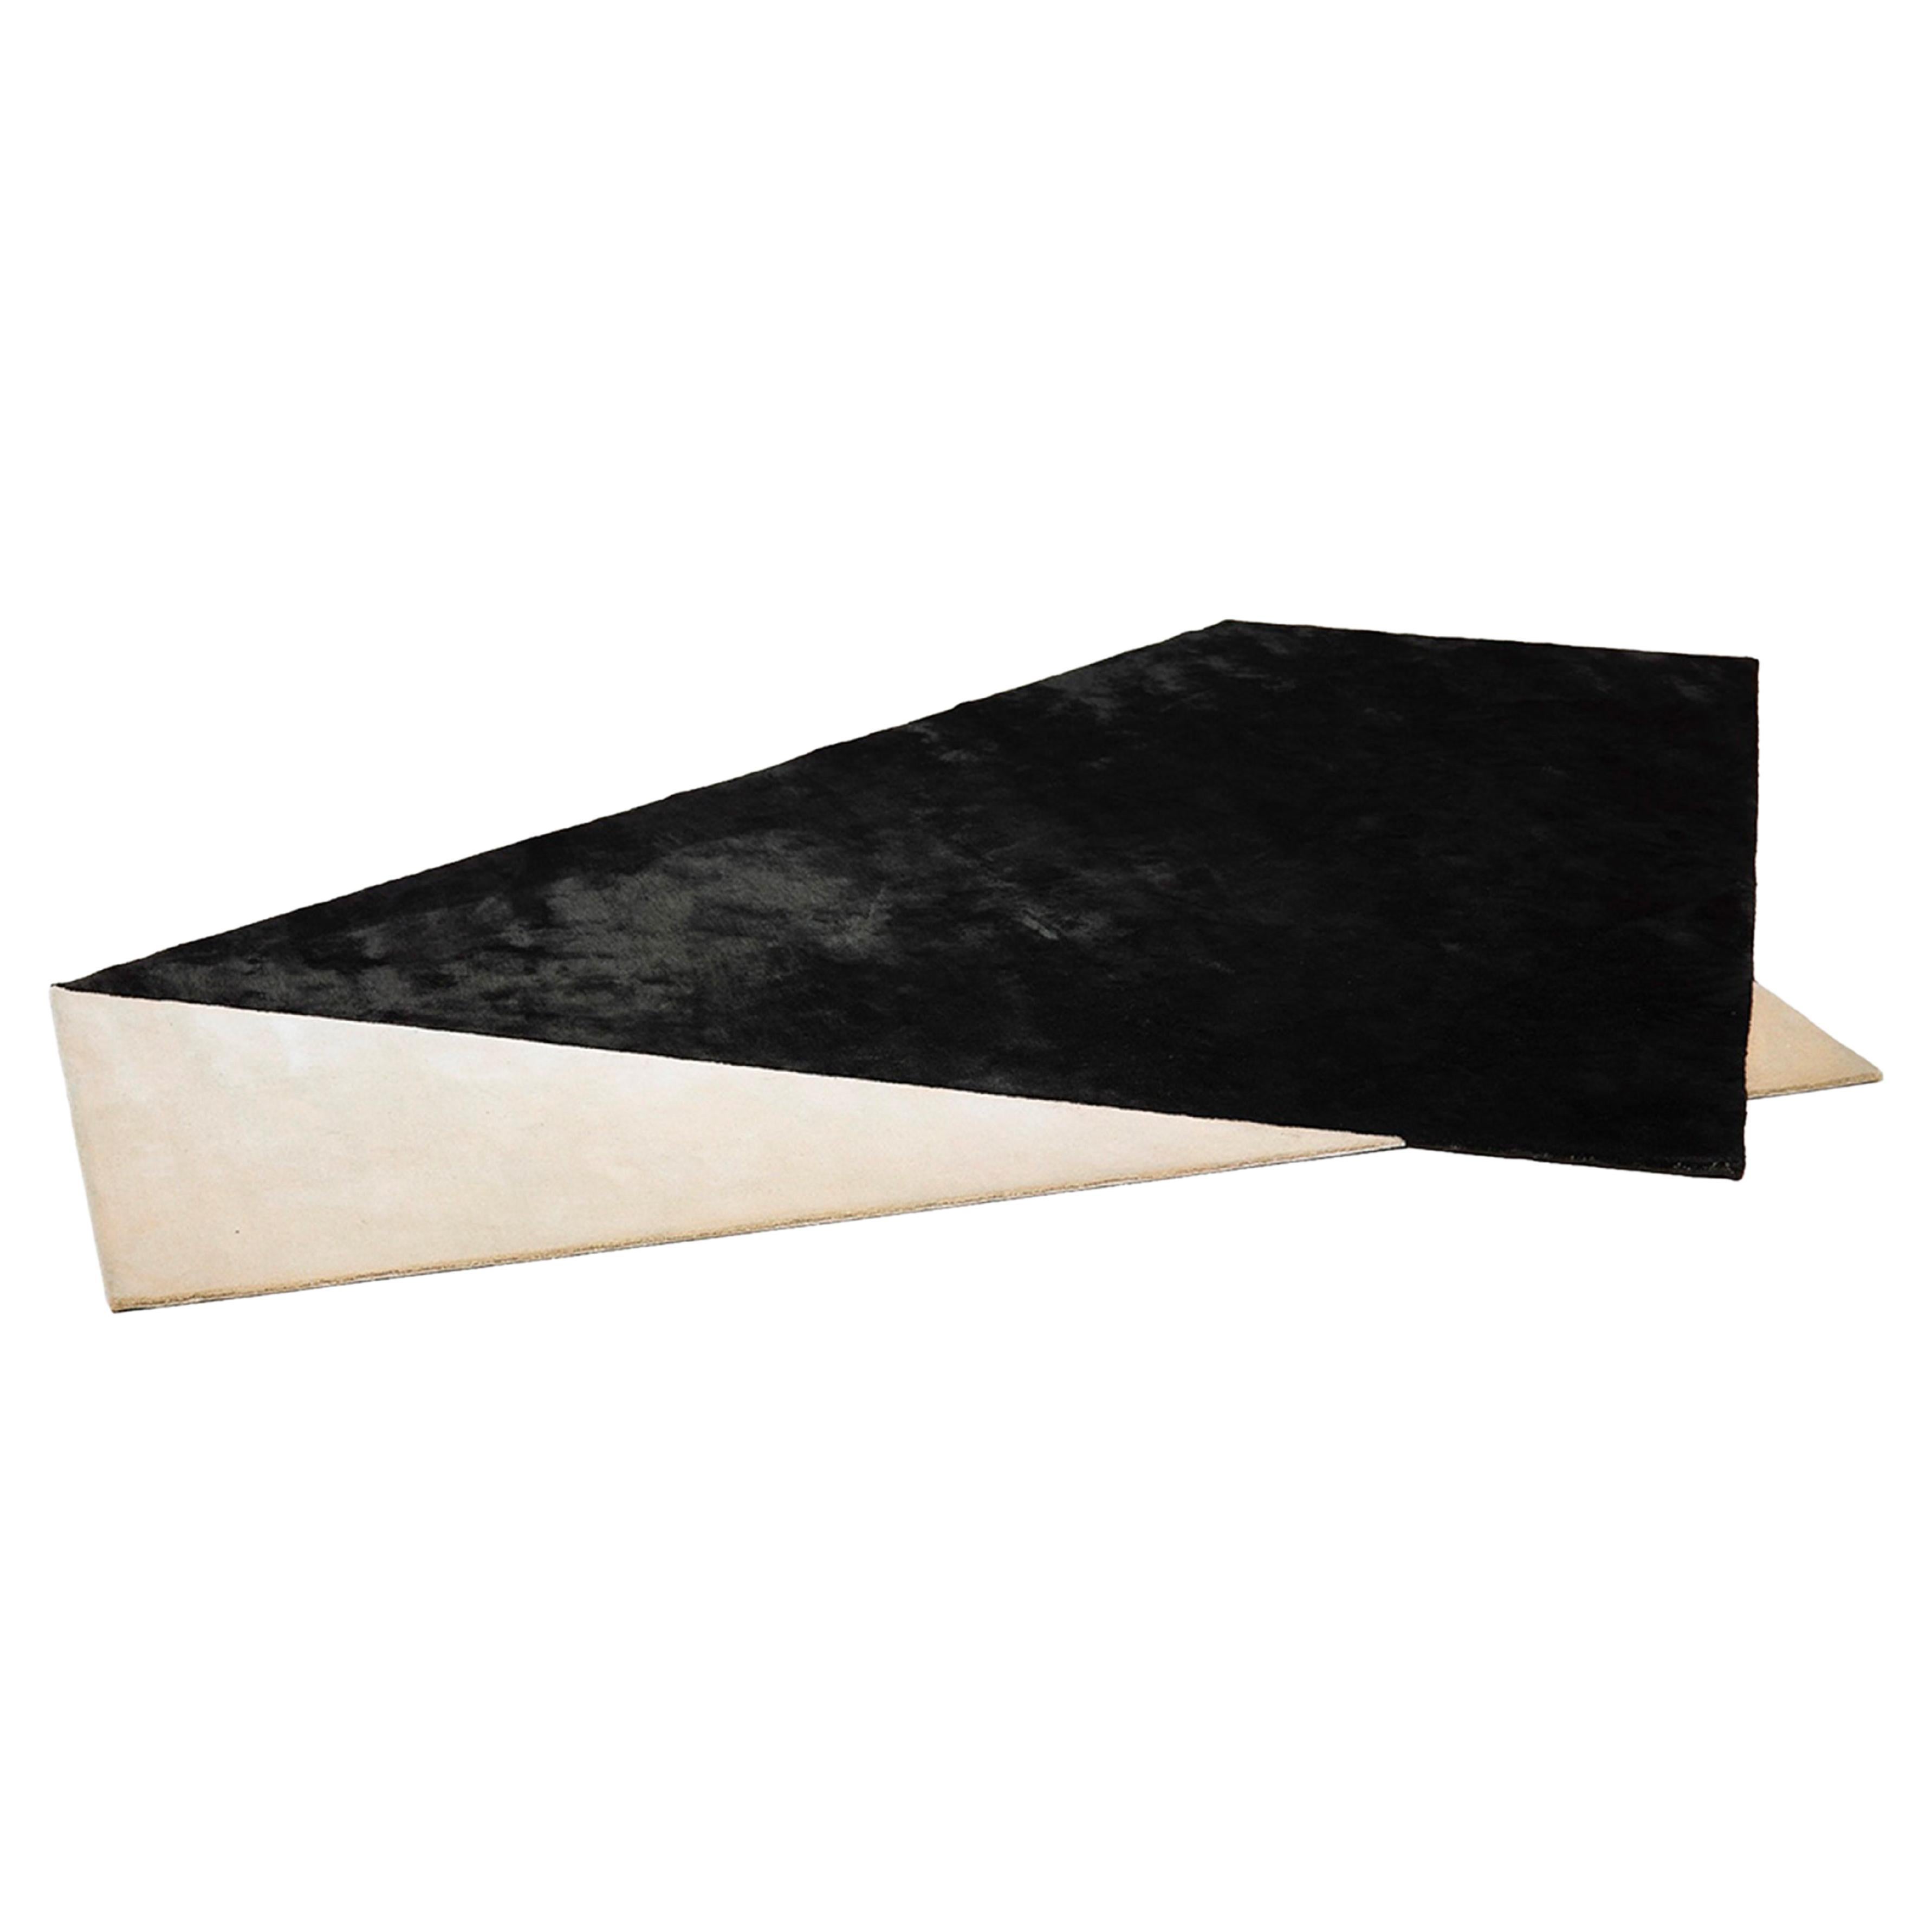 The Other Side Black and White Carpet 1 by Pierre Gonalons Paradisoterrestre  For Sale